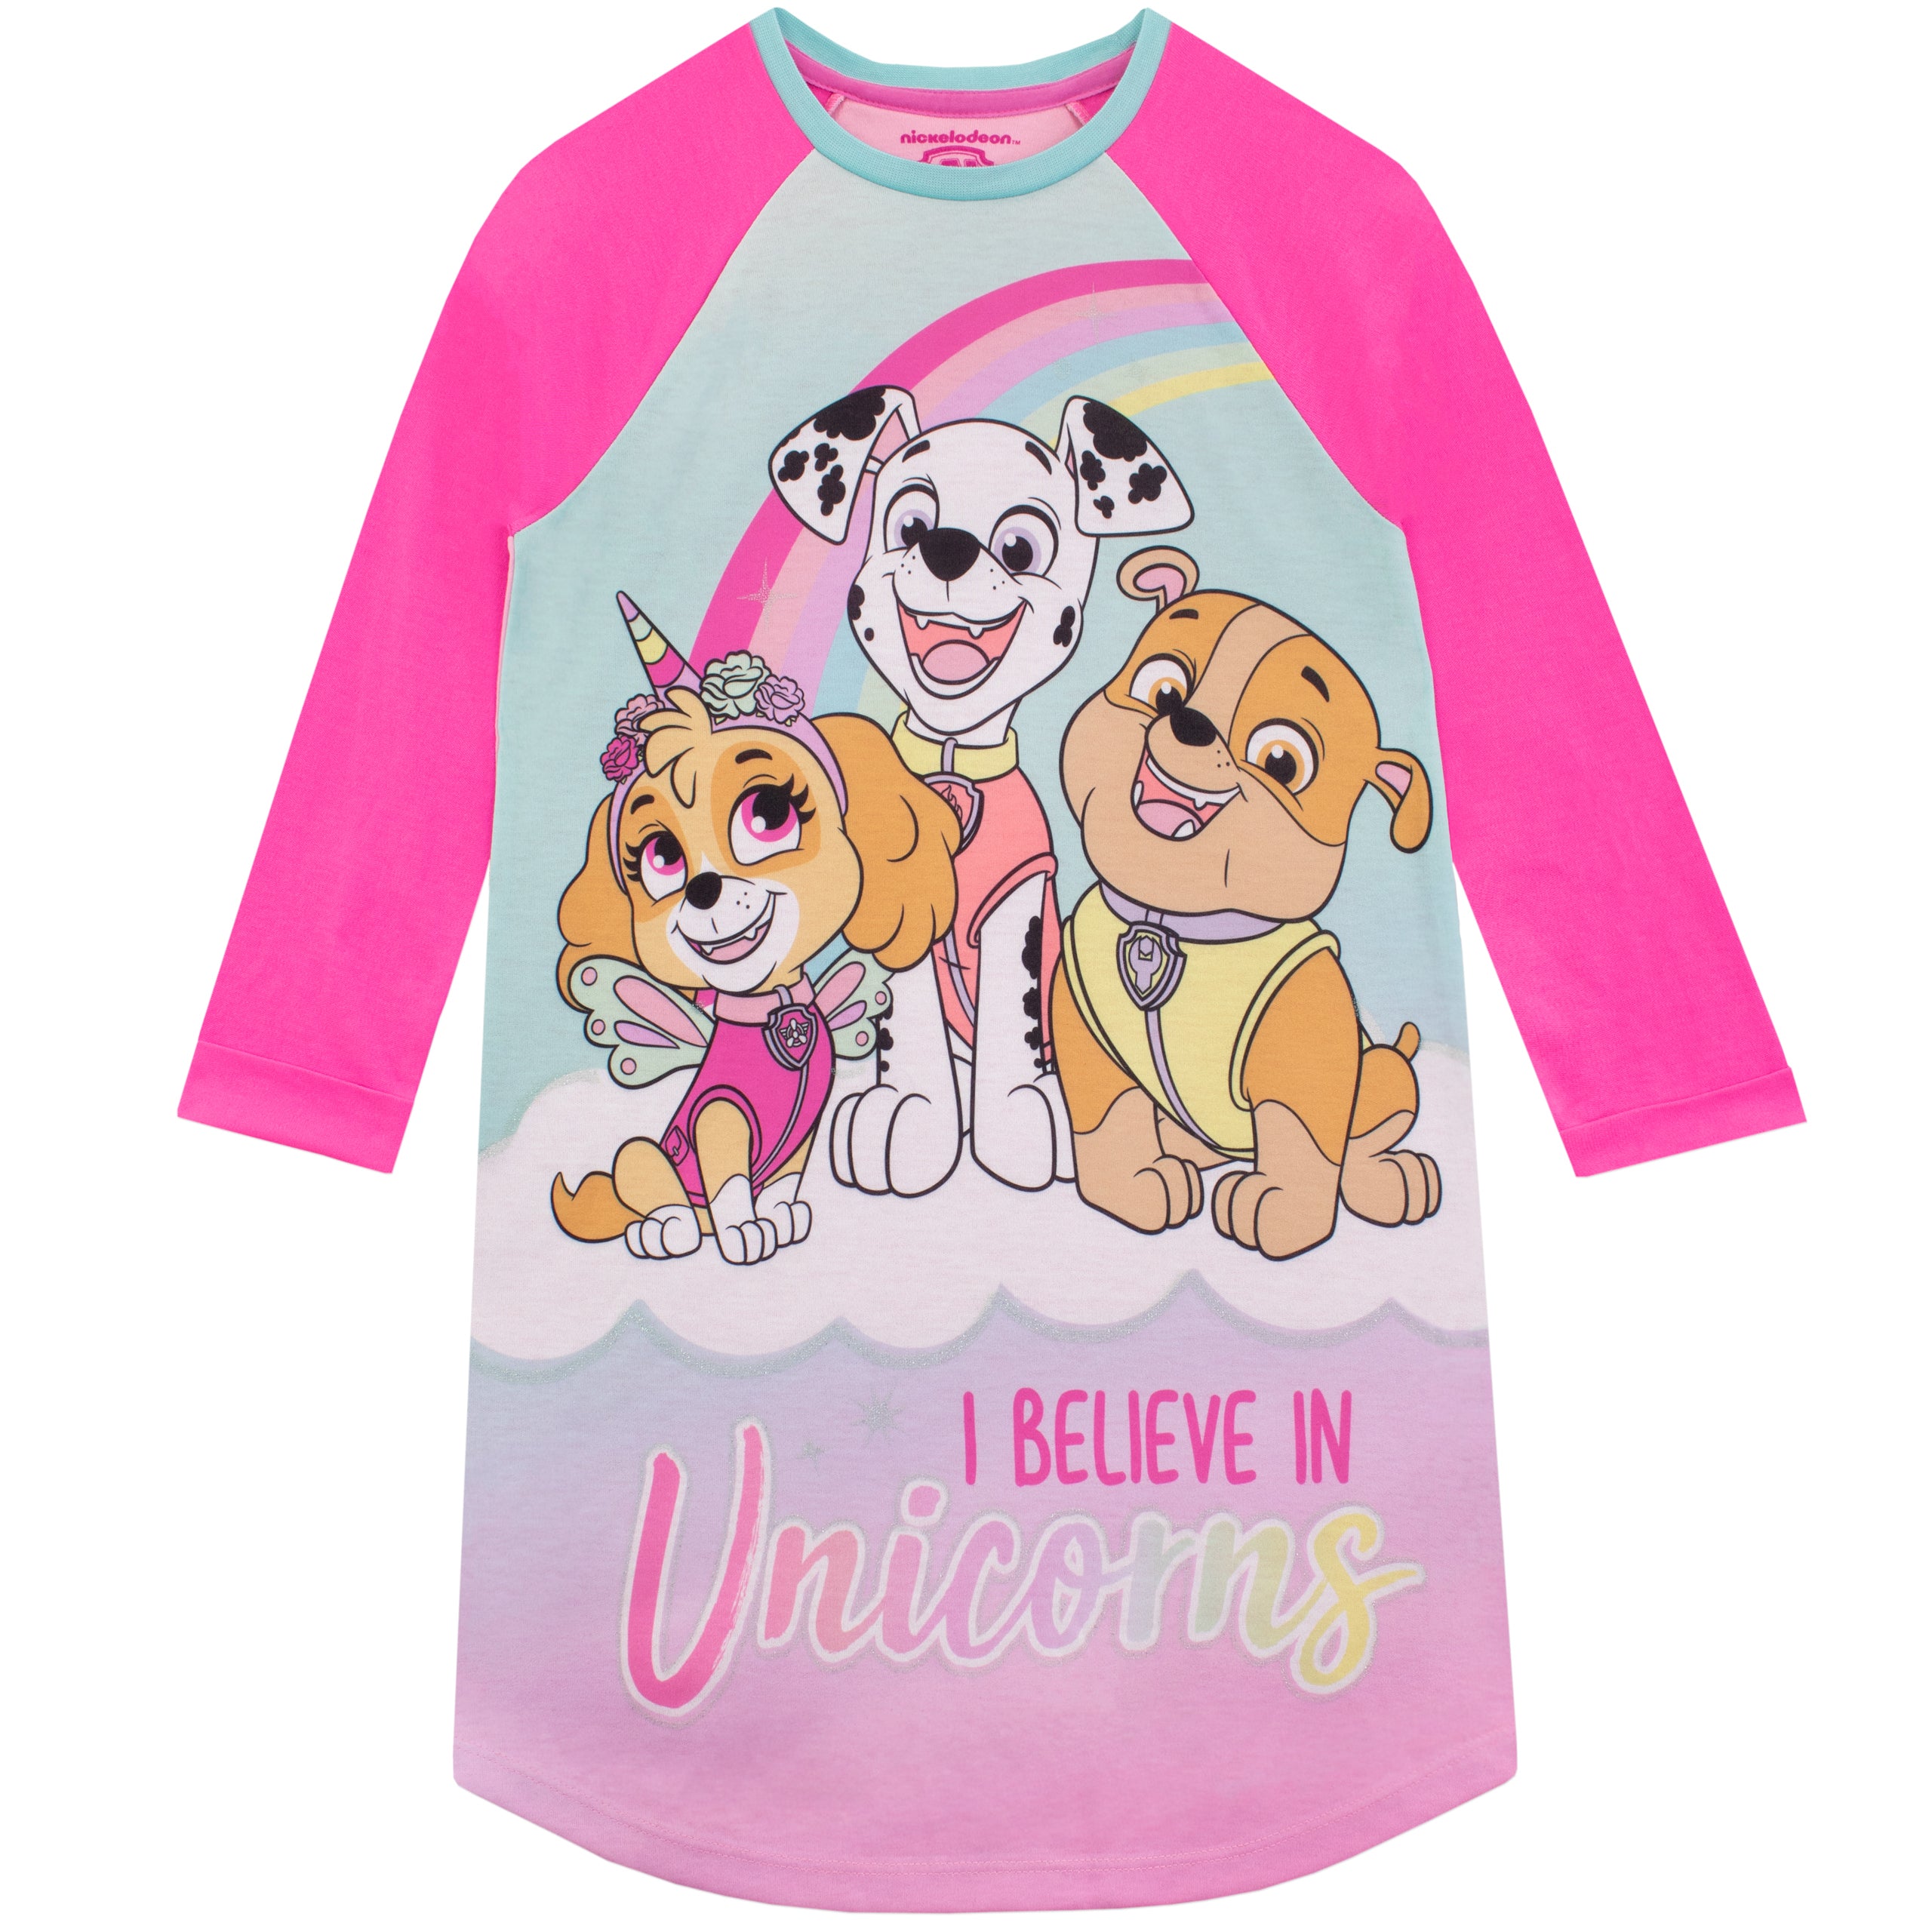 Paw Patrol Nightdress | Kids | Official Character.com Merchandise